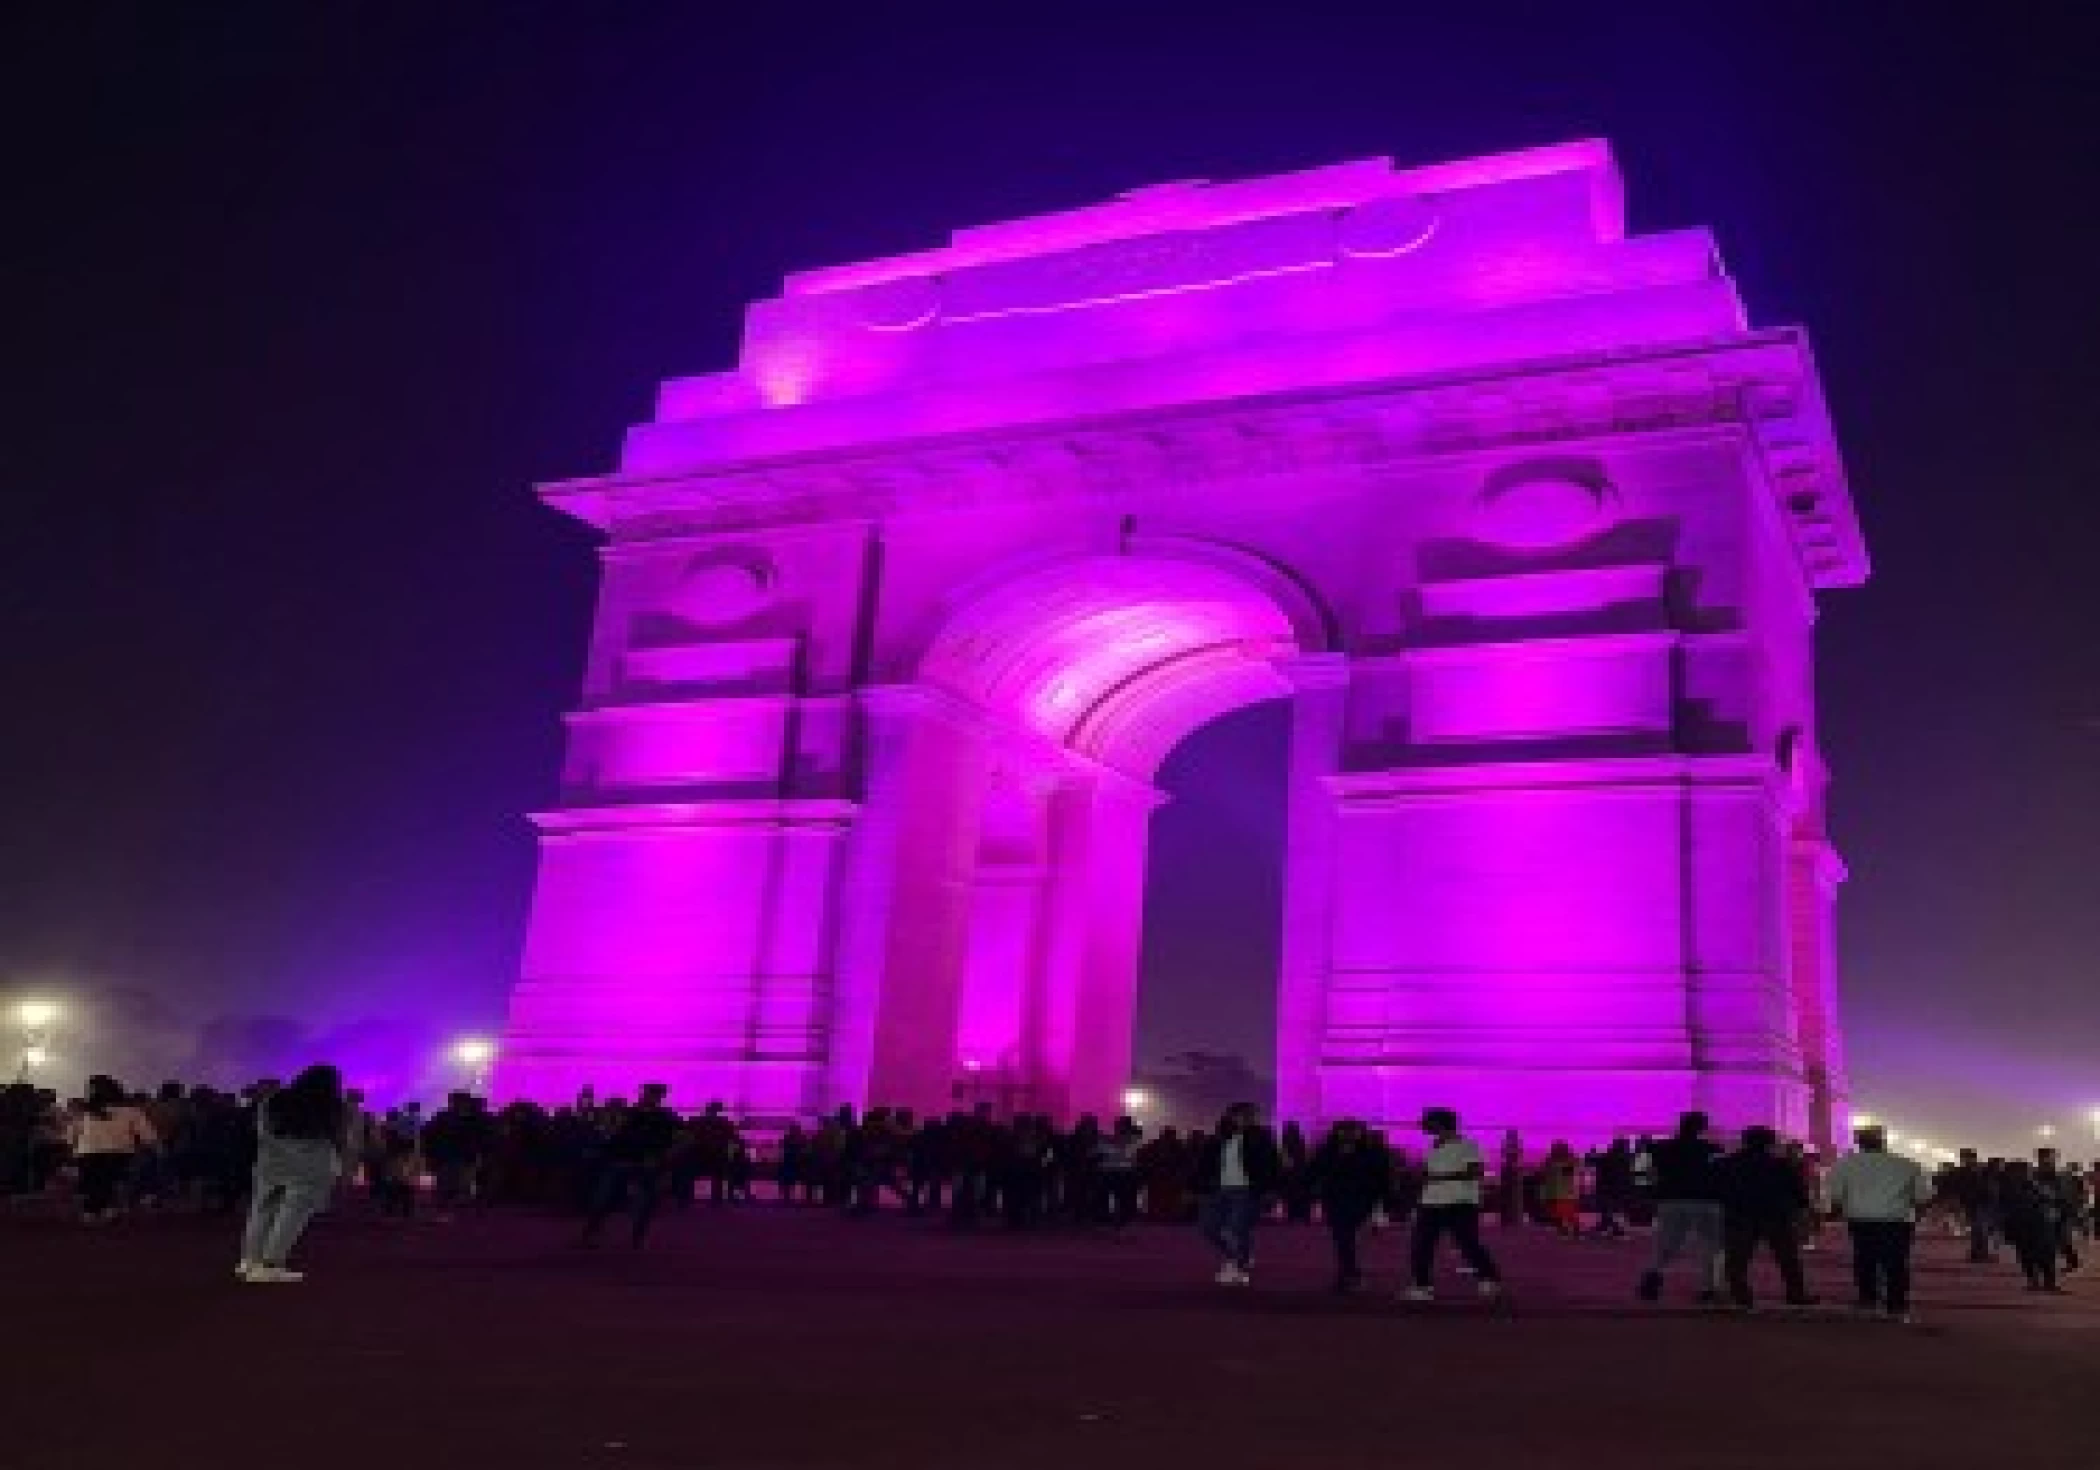 India Gate Rashtrapati Bhawan, and Parliament House to turn purple on World Disability Day